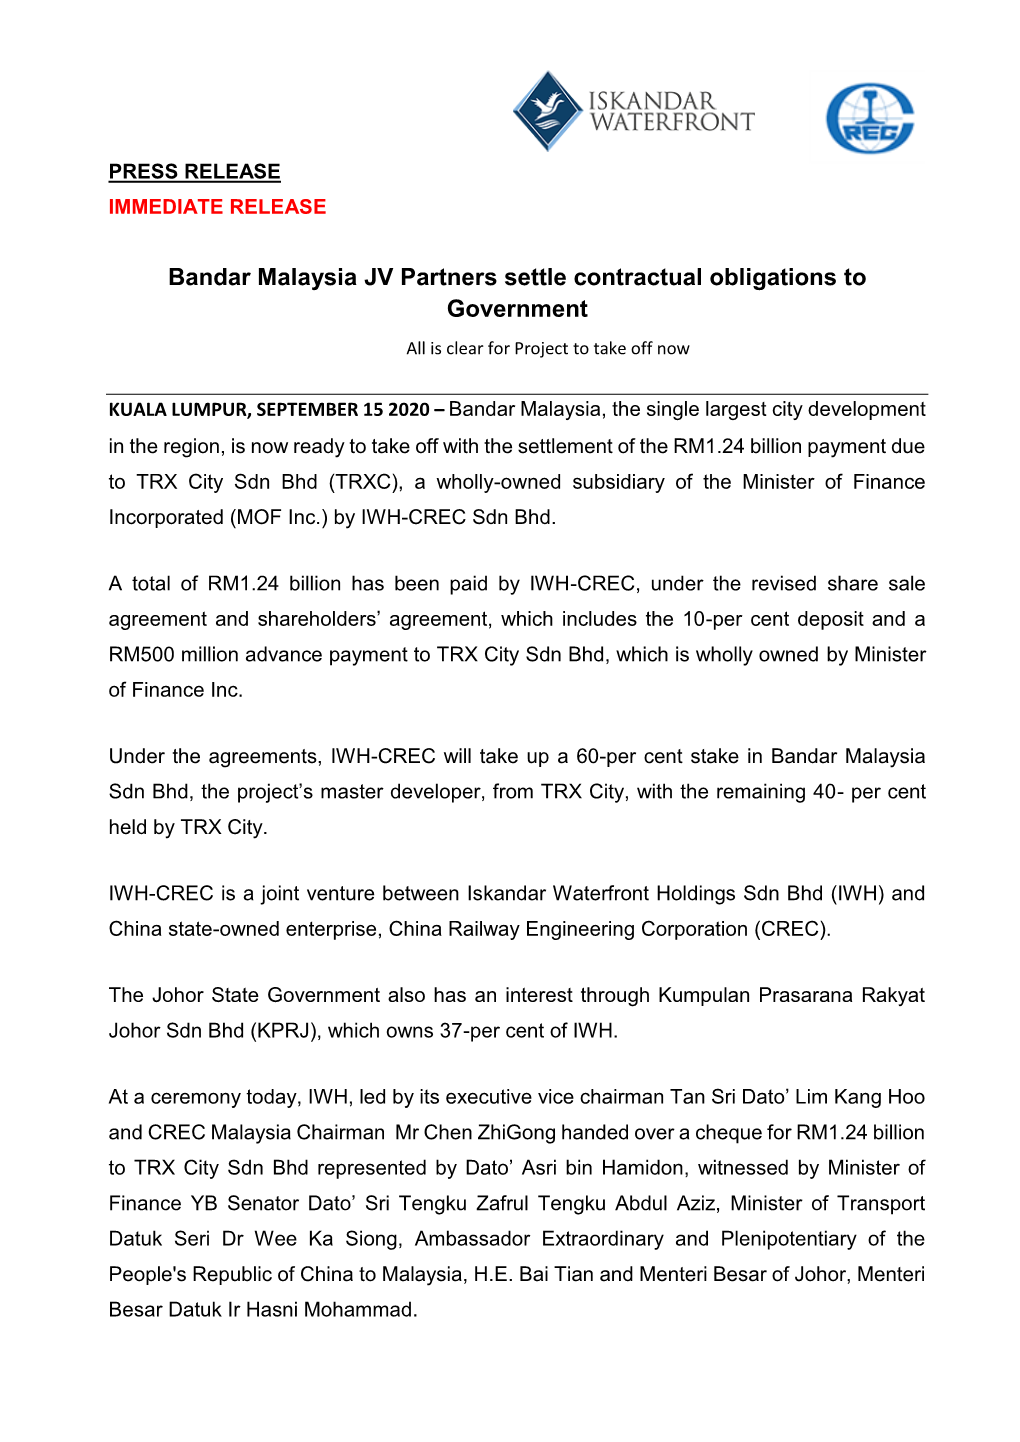 Bandar Malaysia JV Partners Settle Contractual Obligations to Government All Is Clear for Project to Take Off Now